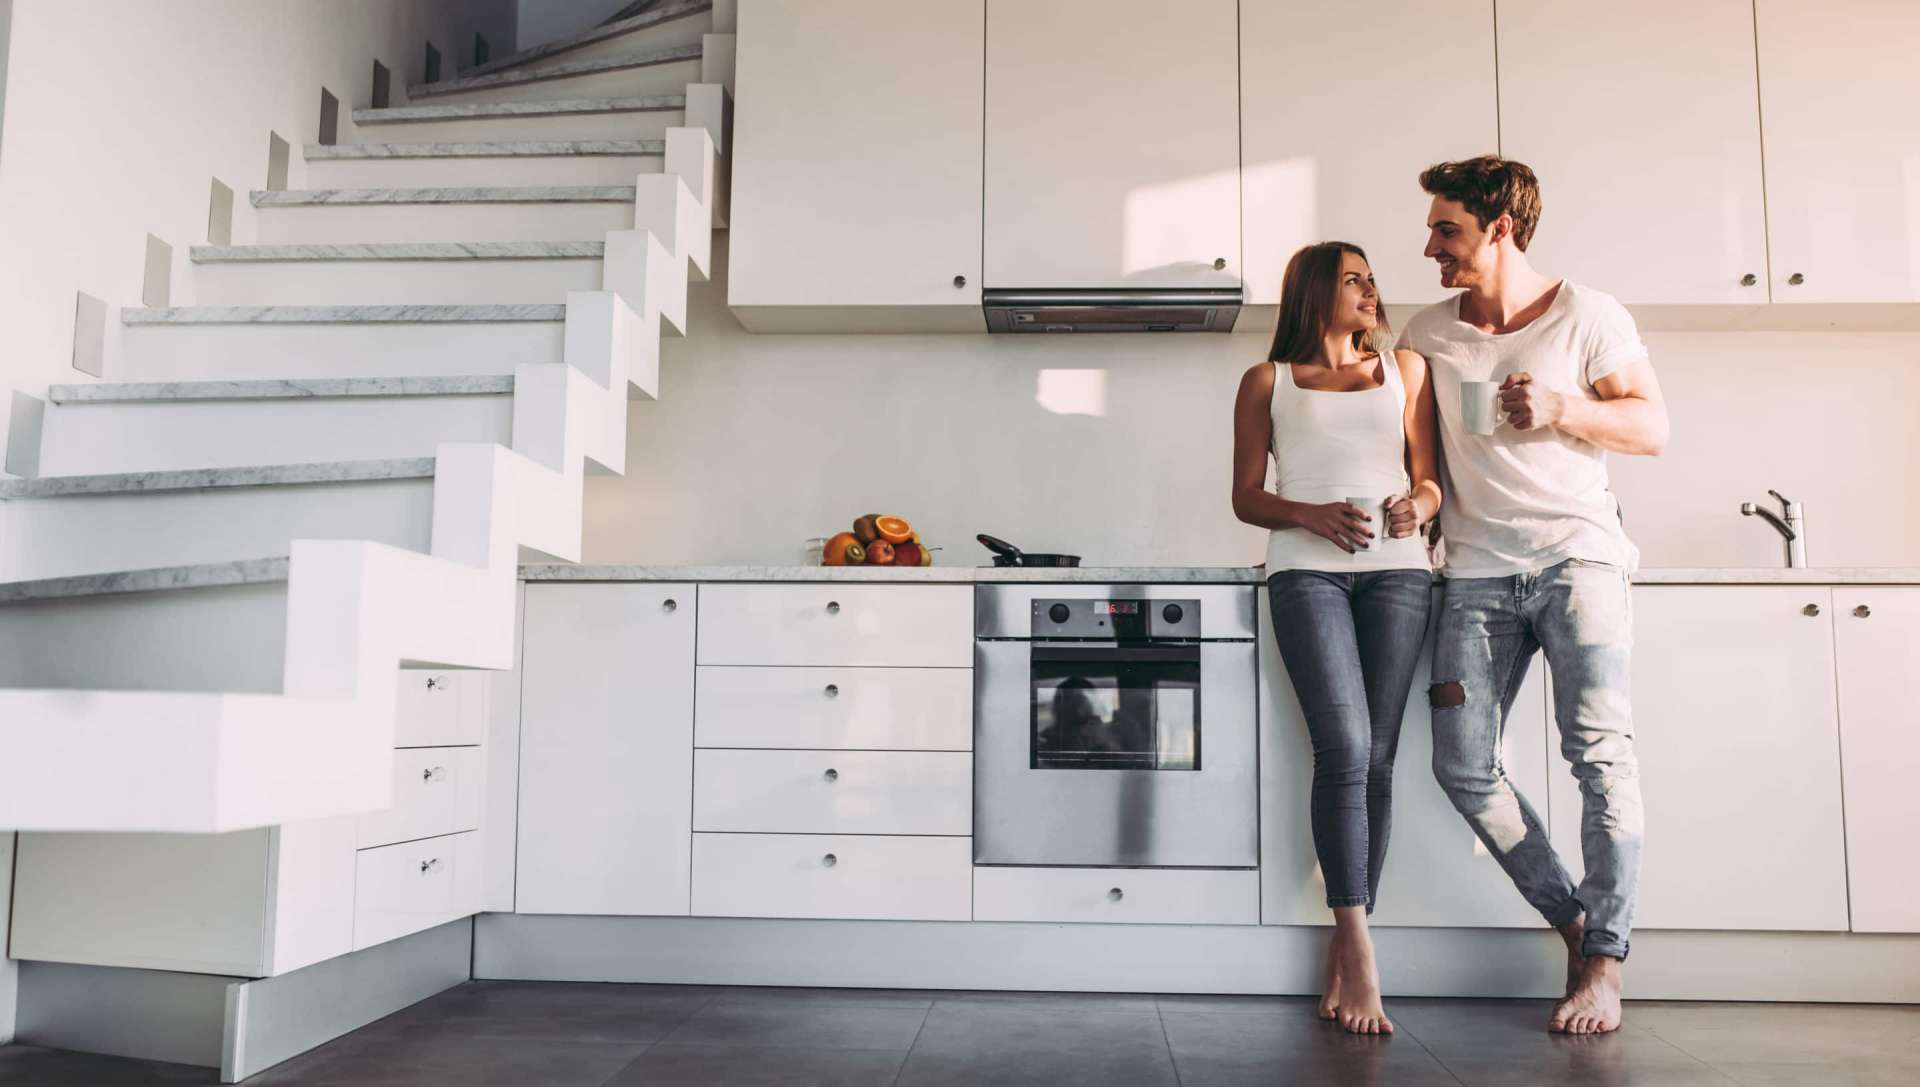 apartment with two floors, man and woman talking in kitchen